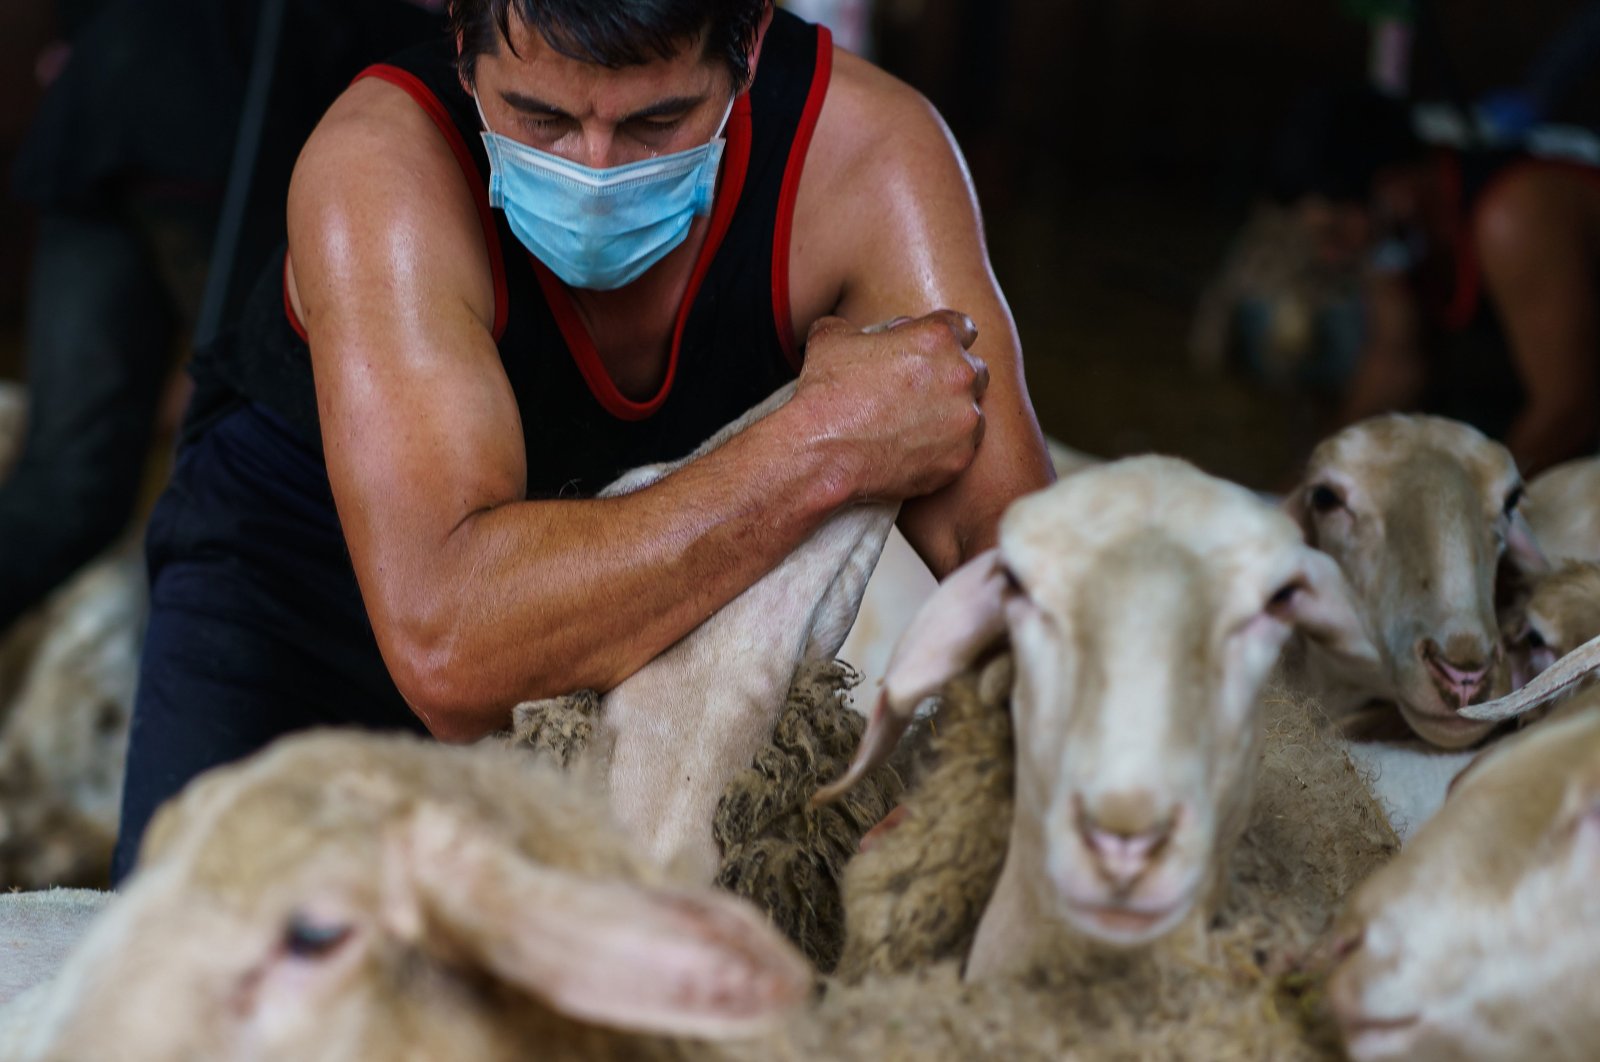 An Uruguayan sheep shearer works at a cattle farm in Leon province's Villabraz in northern Spain, May 15, 2020. (AFP Photo)